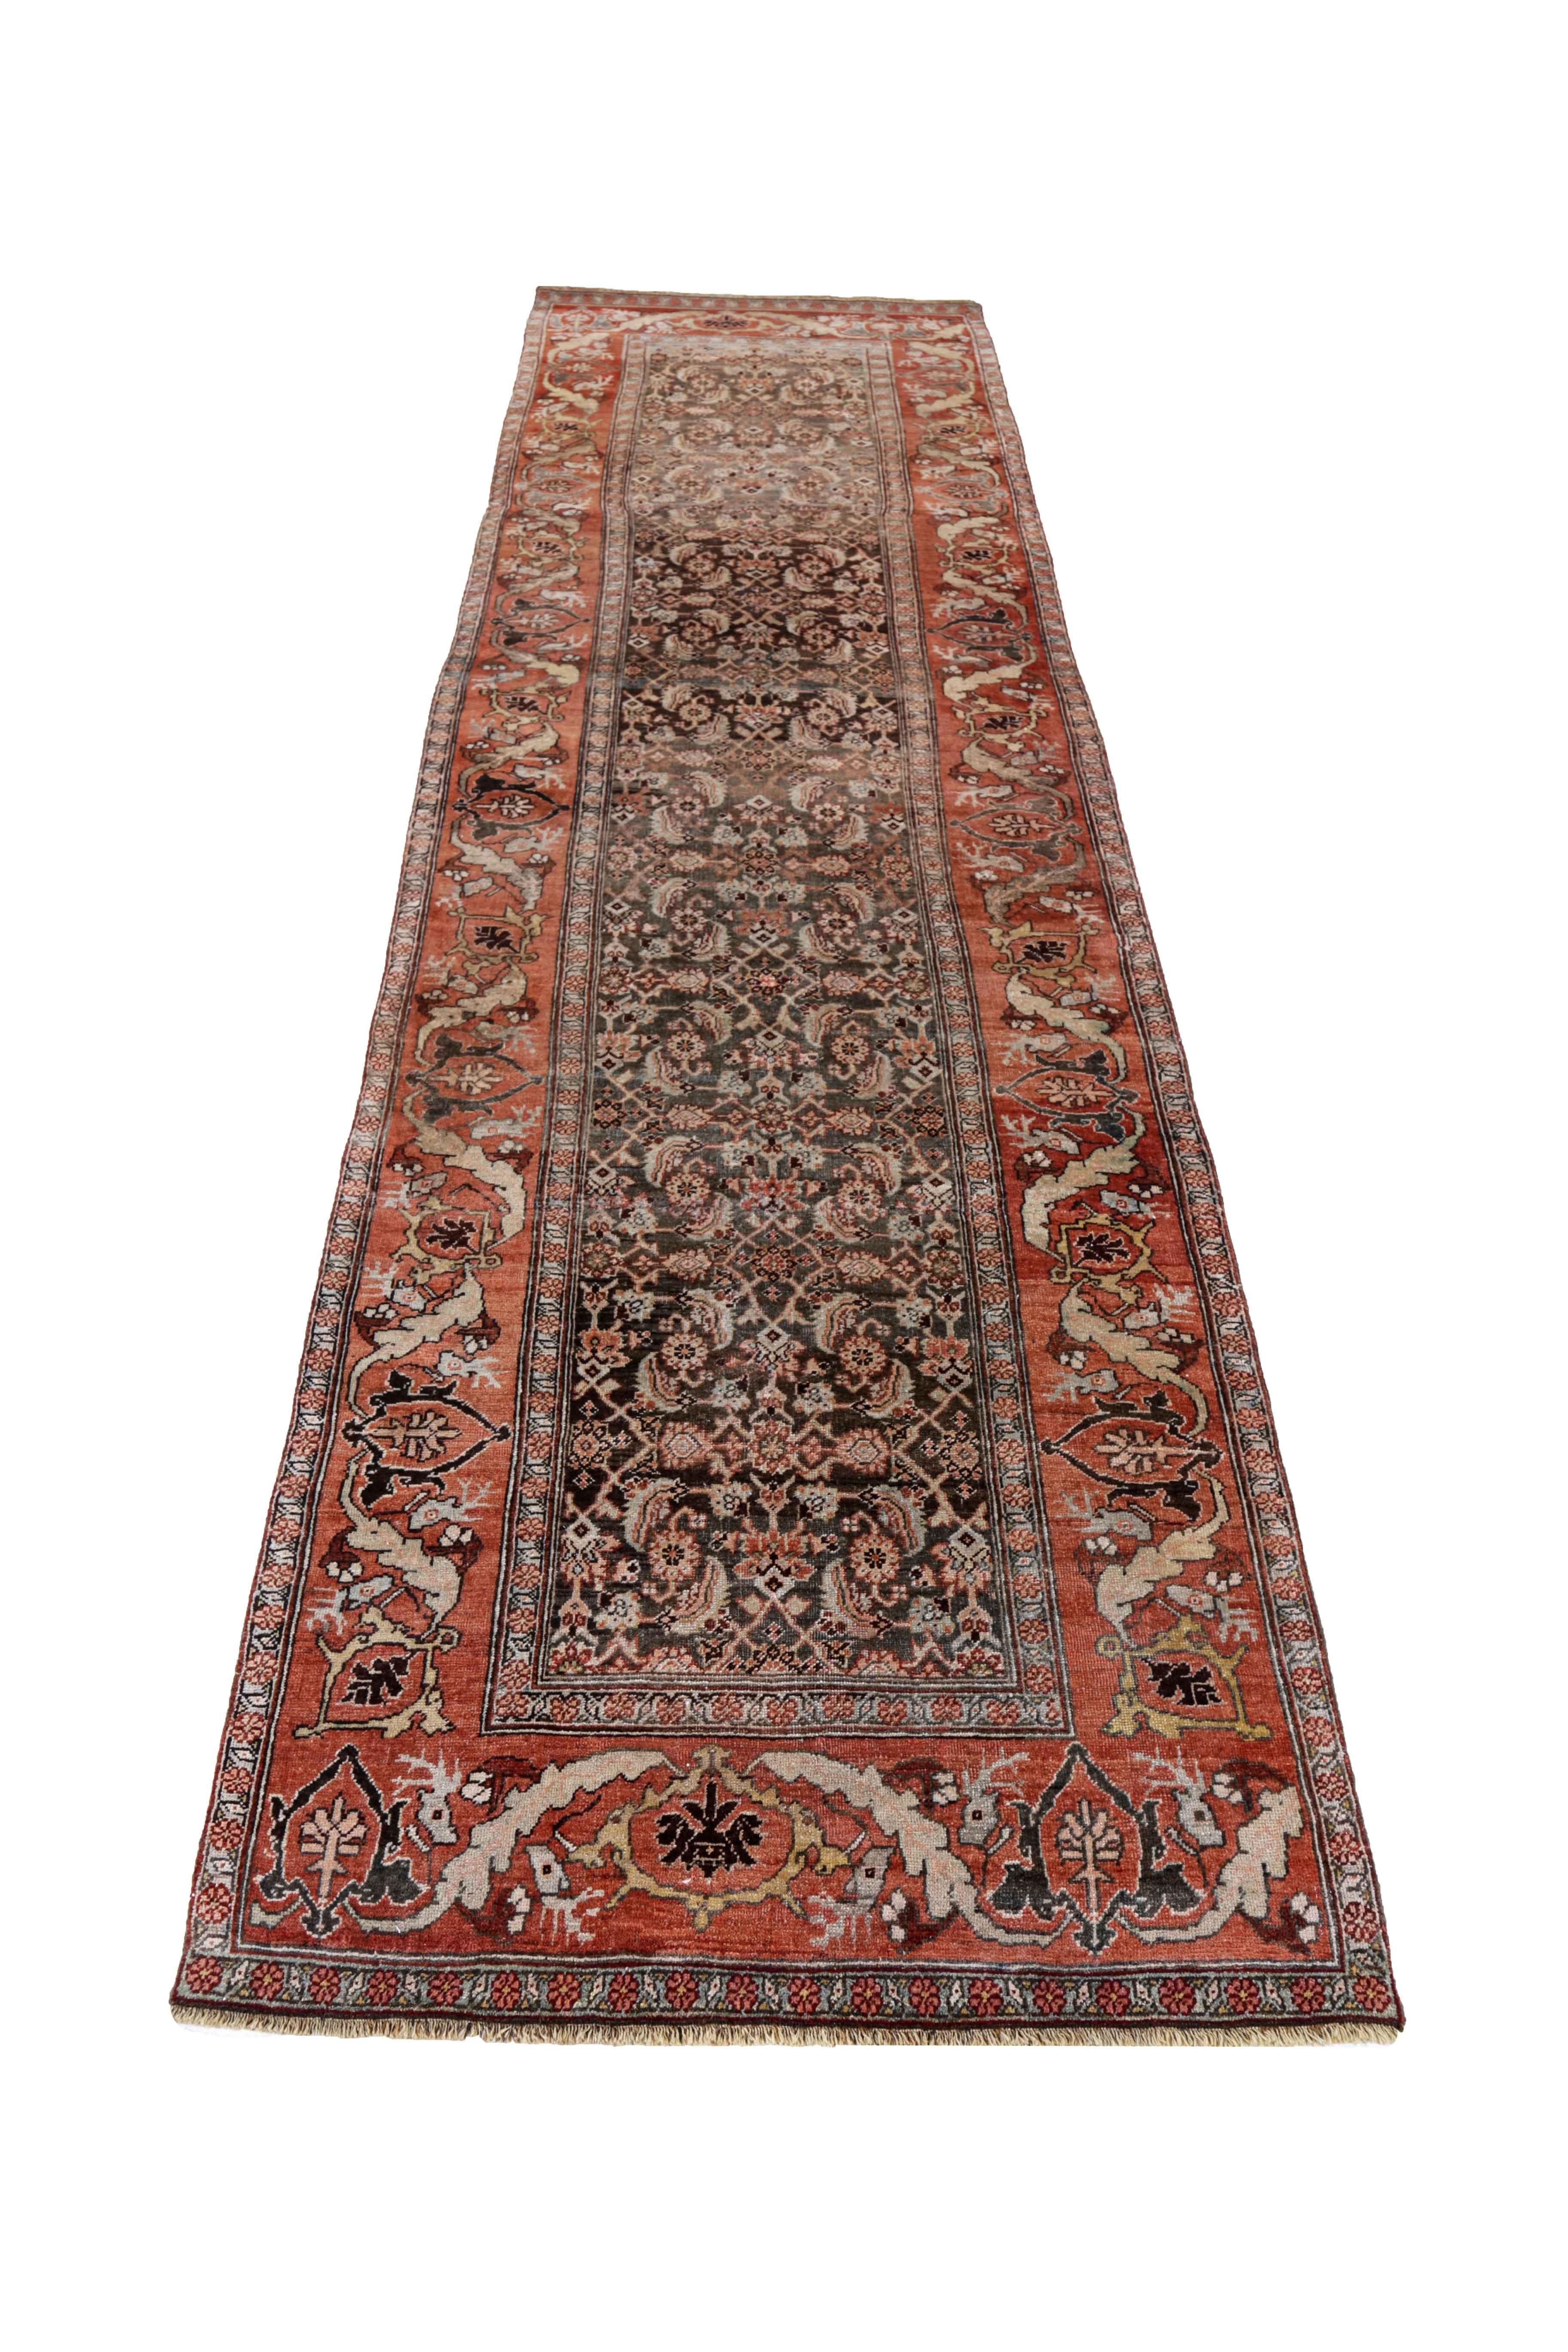 Antique Persian runner rug handwoven from the finest sheep’s wool. It’s colored with all-natural vegetable dyes that are safe for humans and pets. It’s a traditional Bijar design handwoven by expert artisans. It’s a lovely runner rug that can be